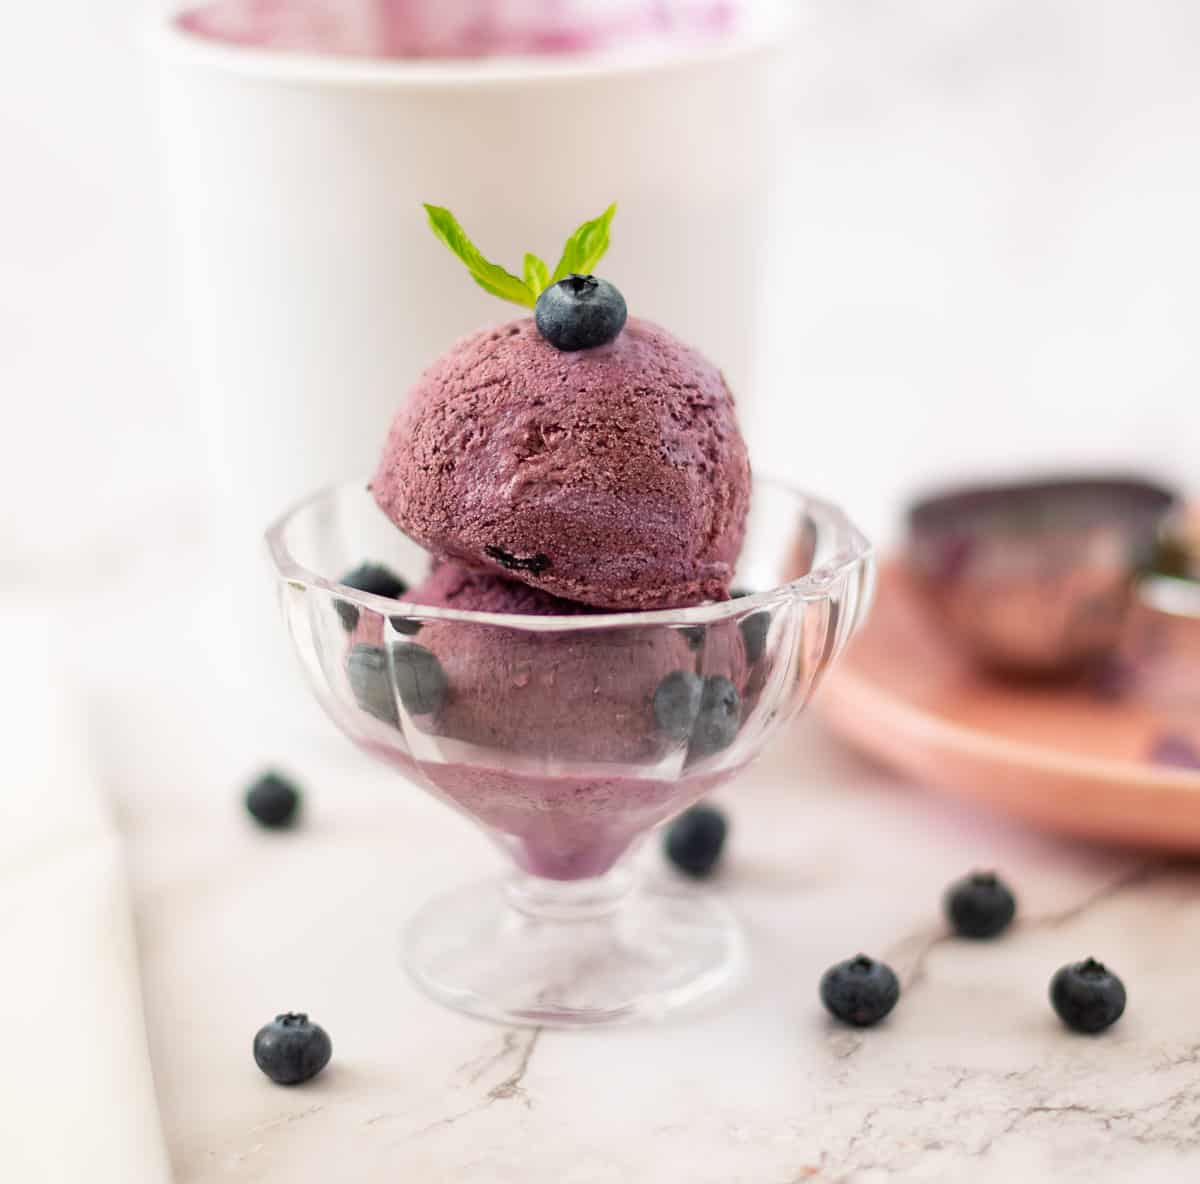 Two scoops of blueberry ice cream in glass bowls.